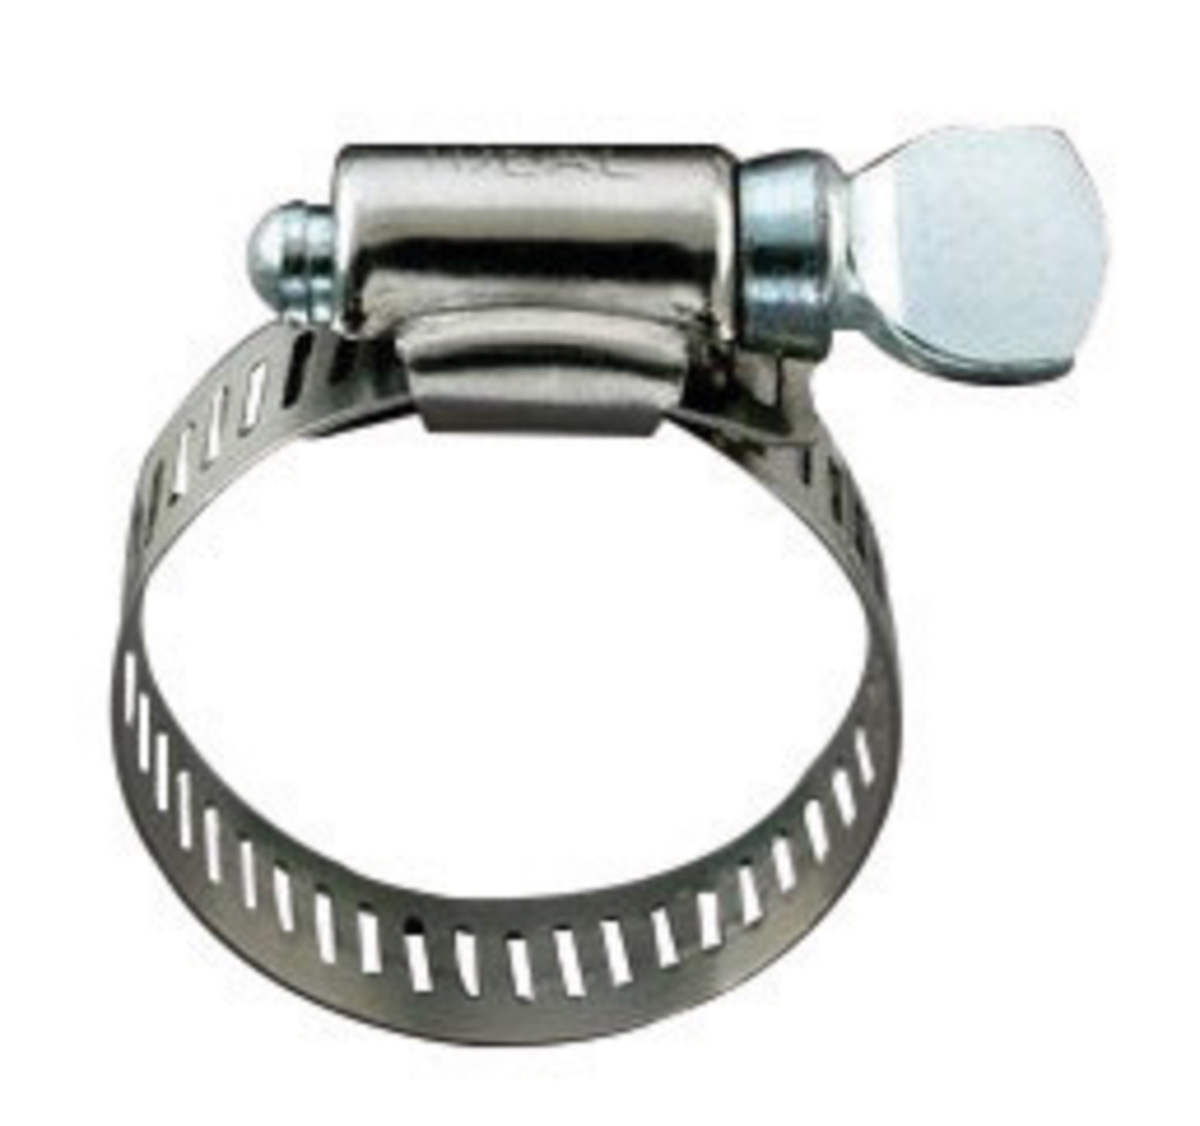 3M™ Metal Thumbscrew Clamp (For Use With 3M™ Whitecap™ Helmets)